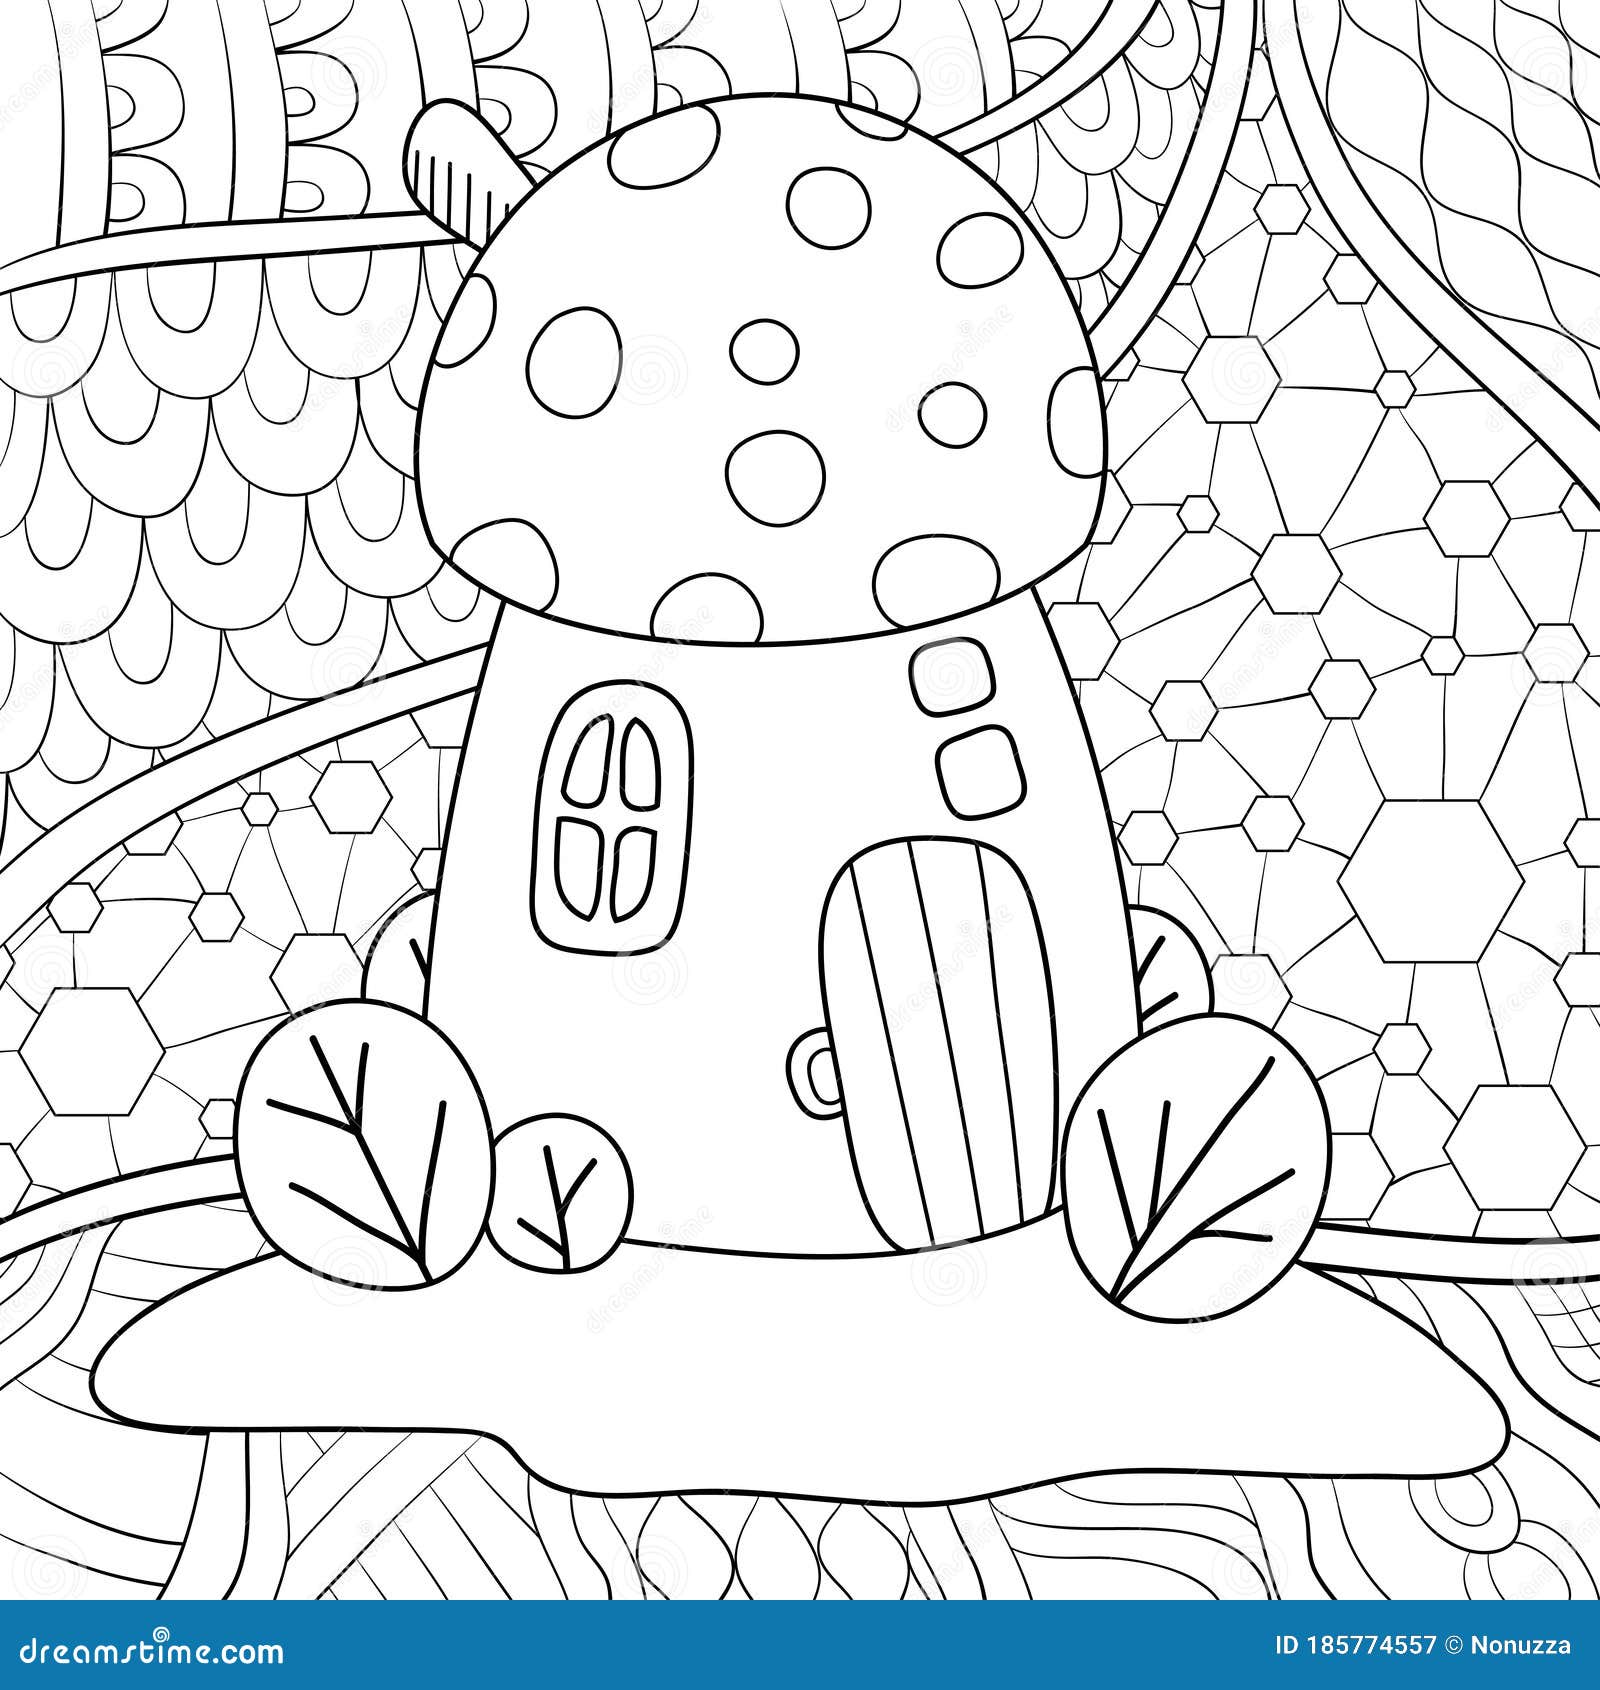 Zentangle Mushroom Coloring Pages